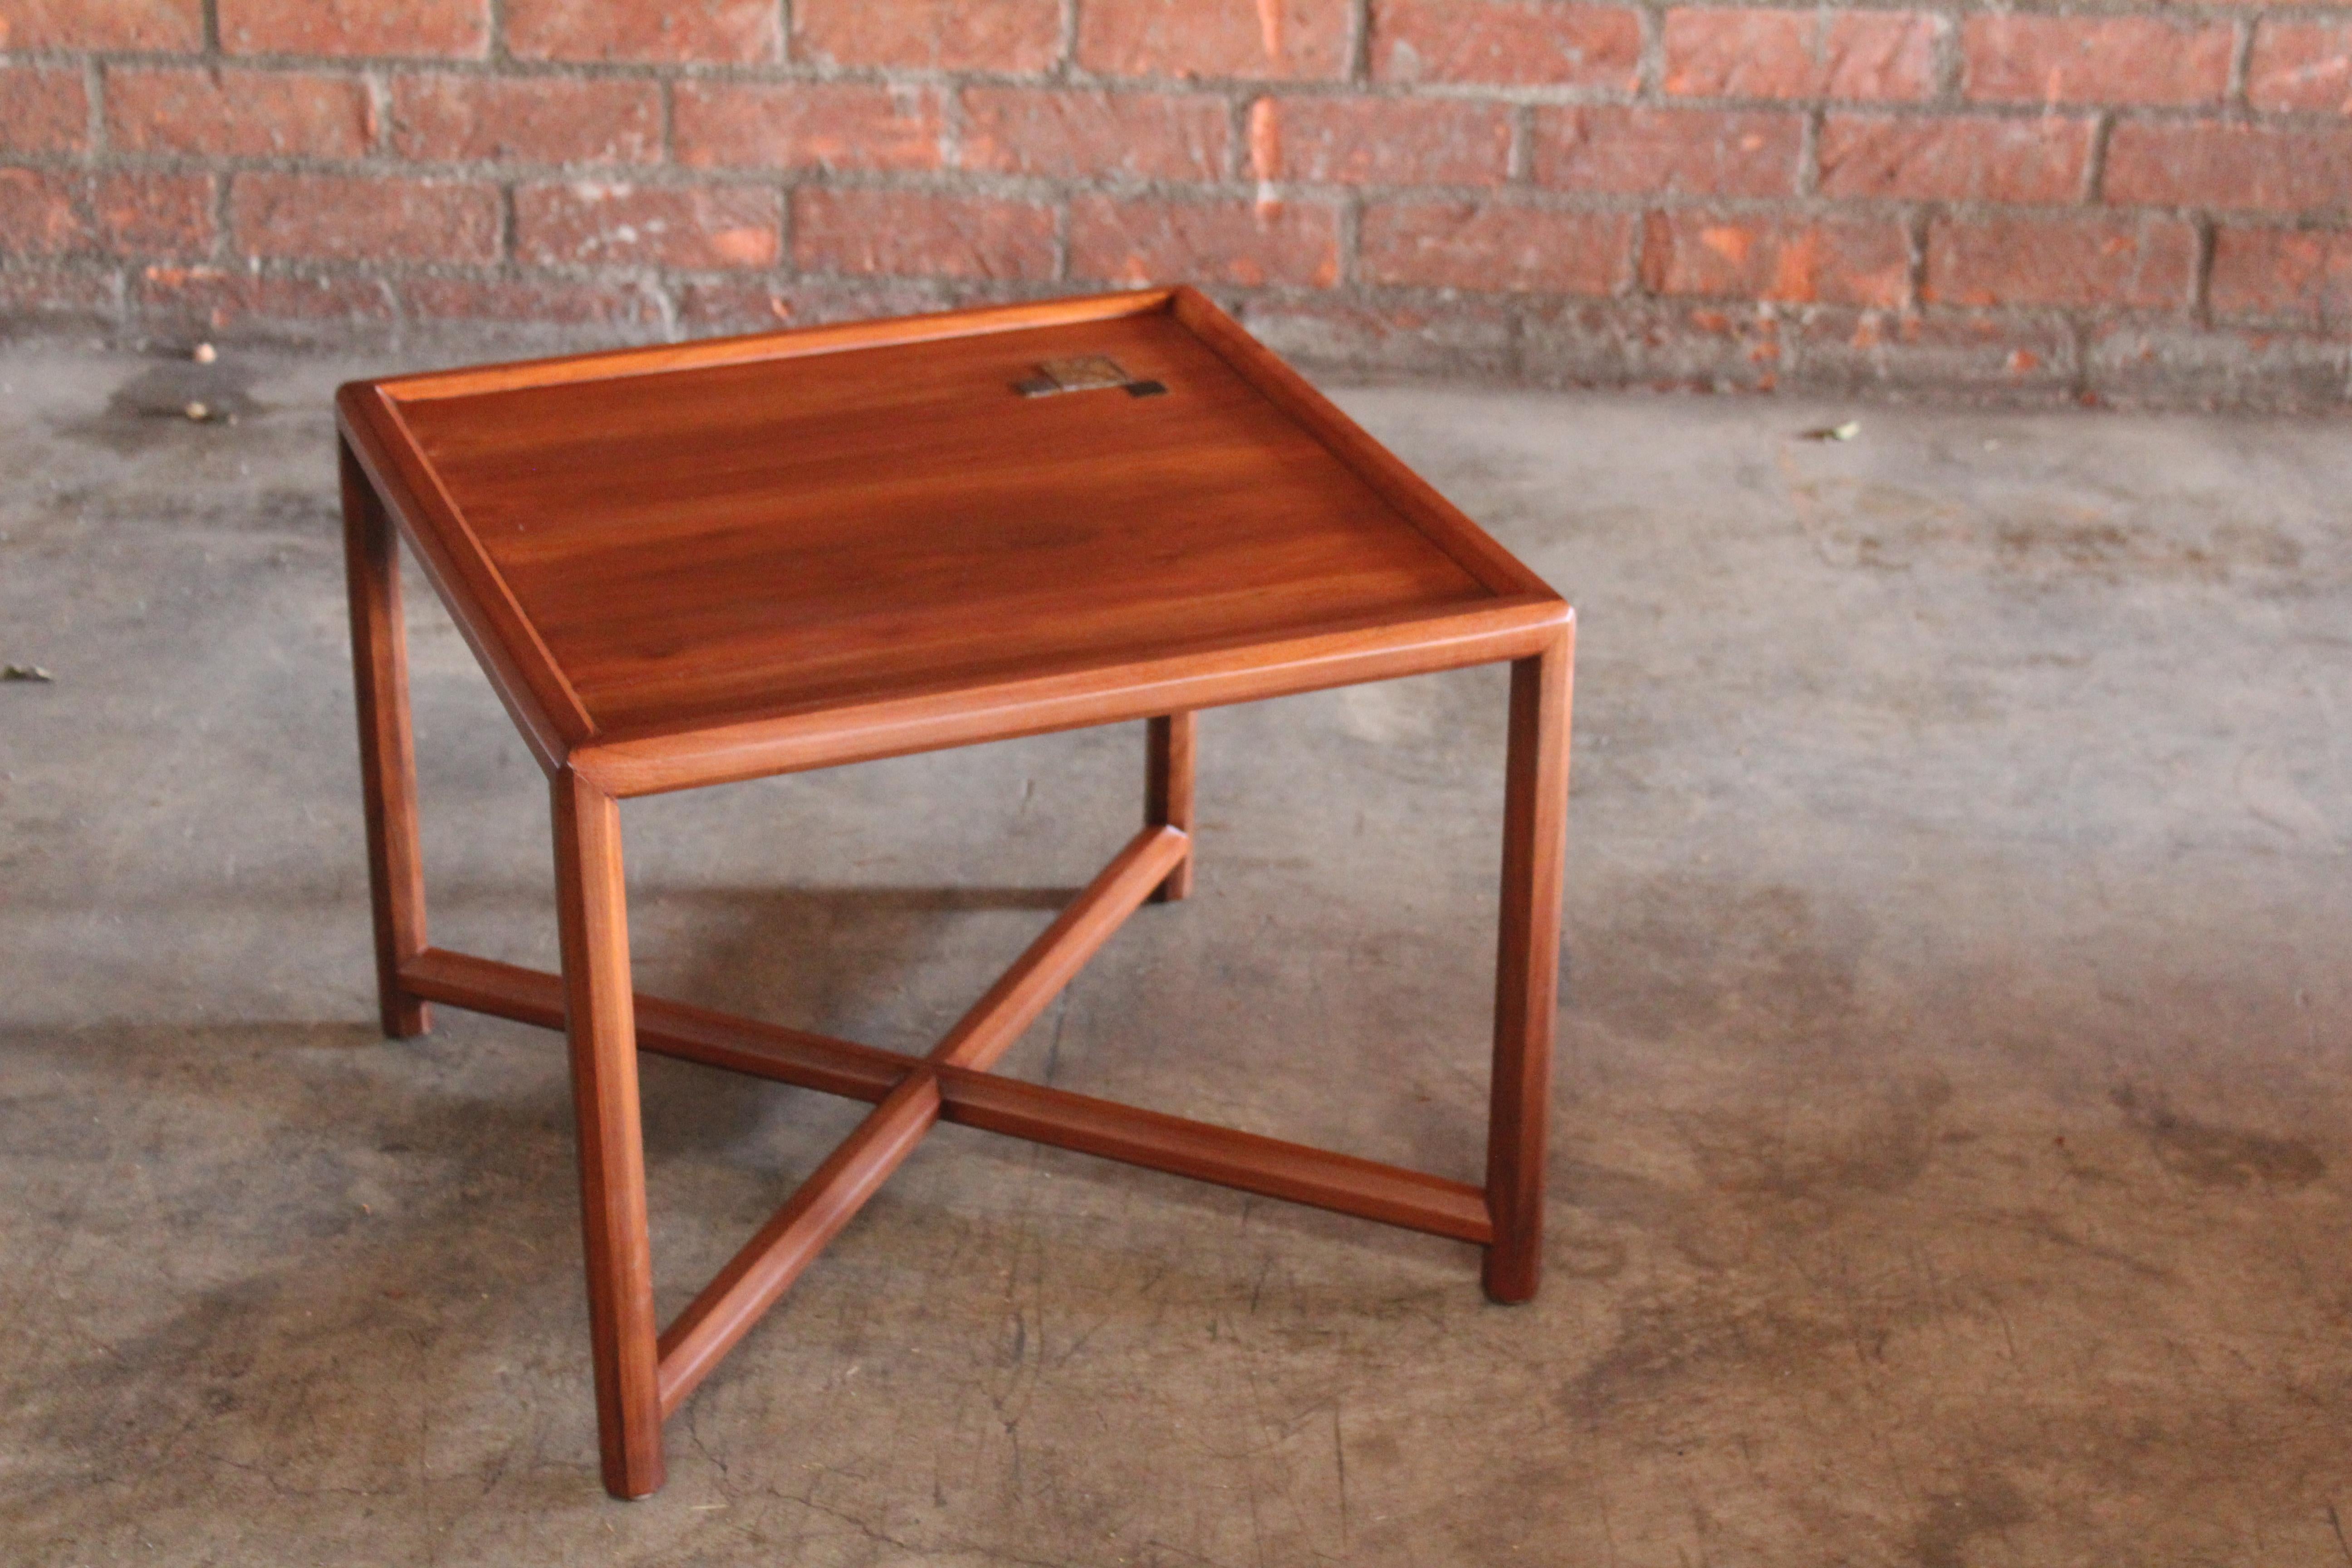 Walnut End Table with Tiffany Tiles by Edward Wormley for Dunbar, 1950s For Sale 4